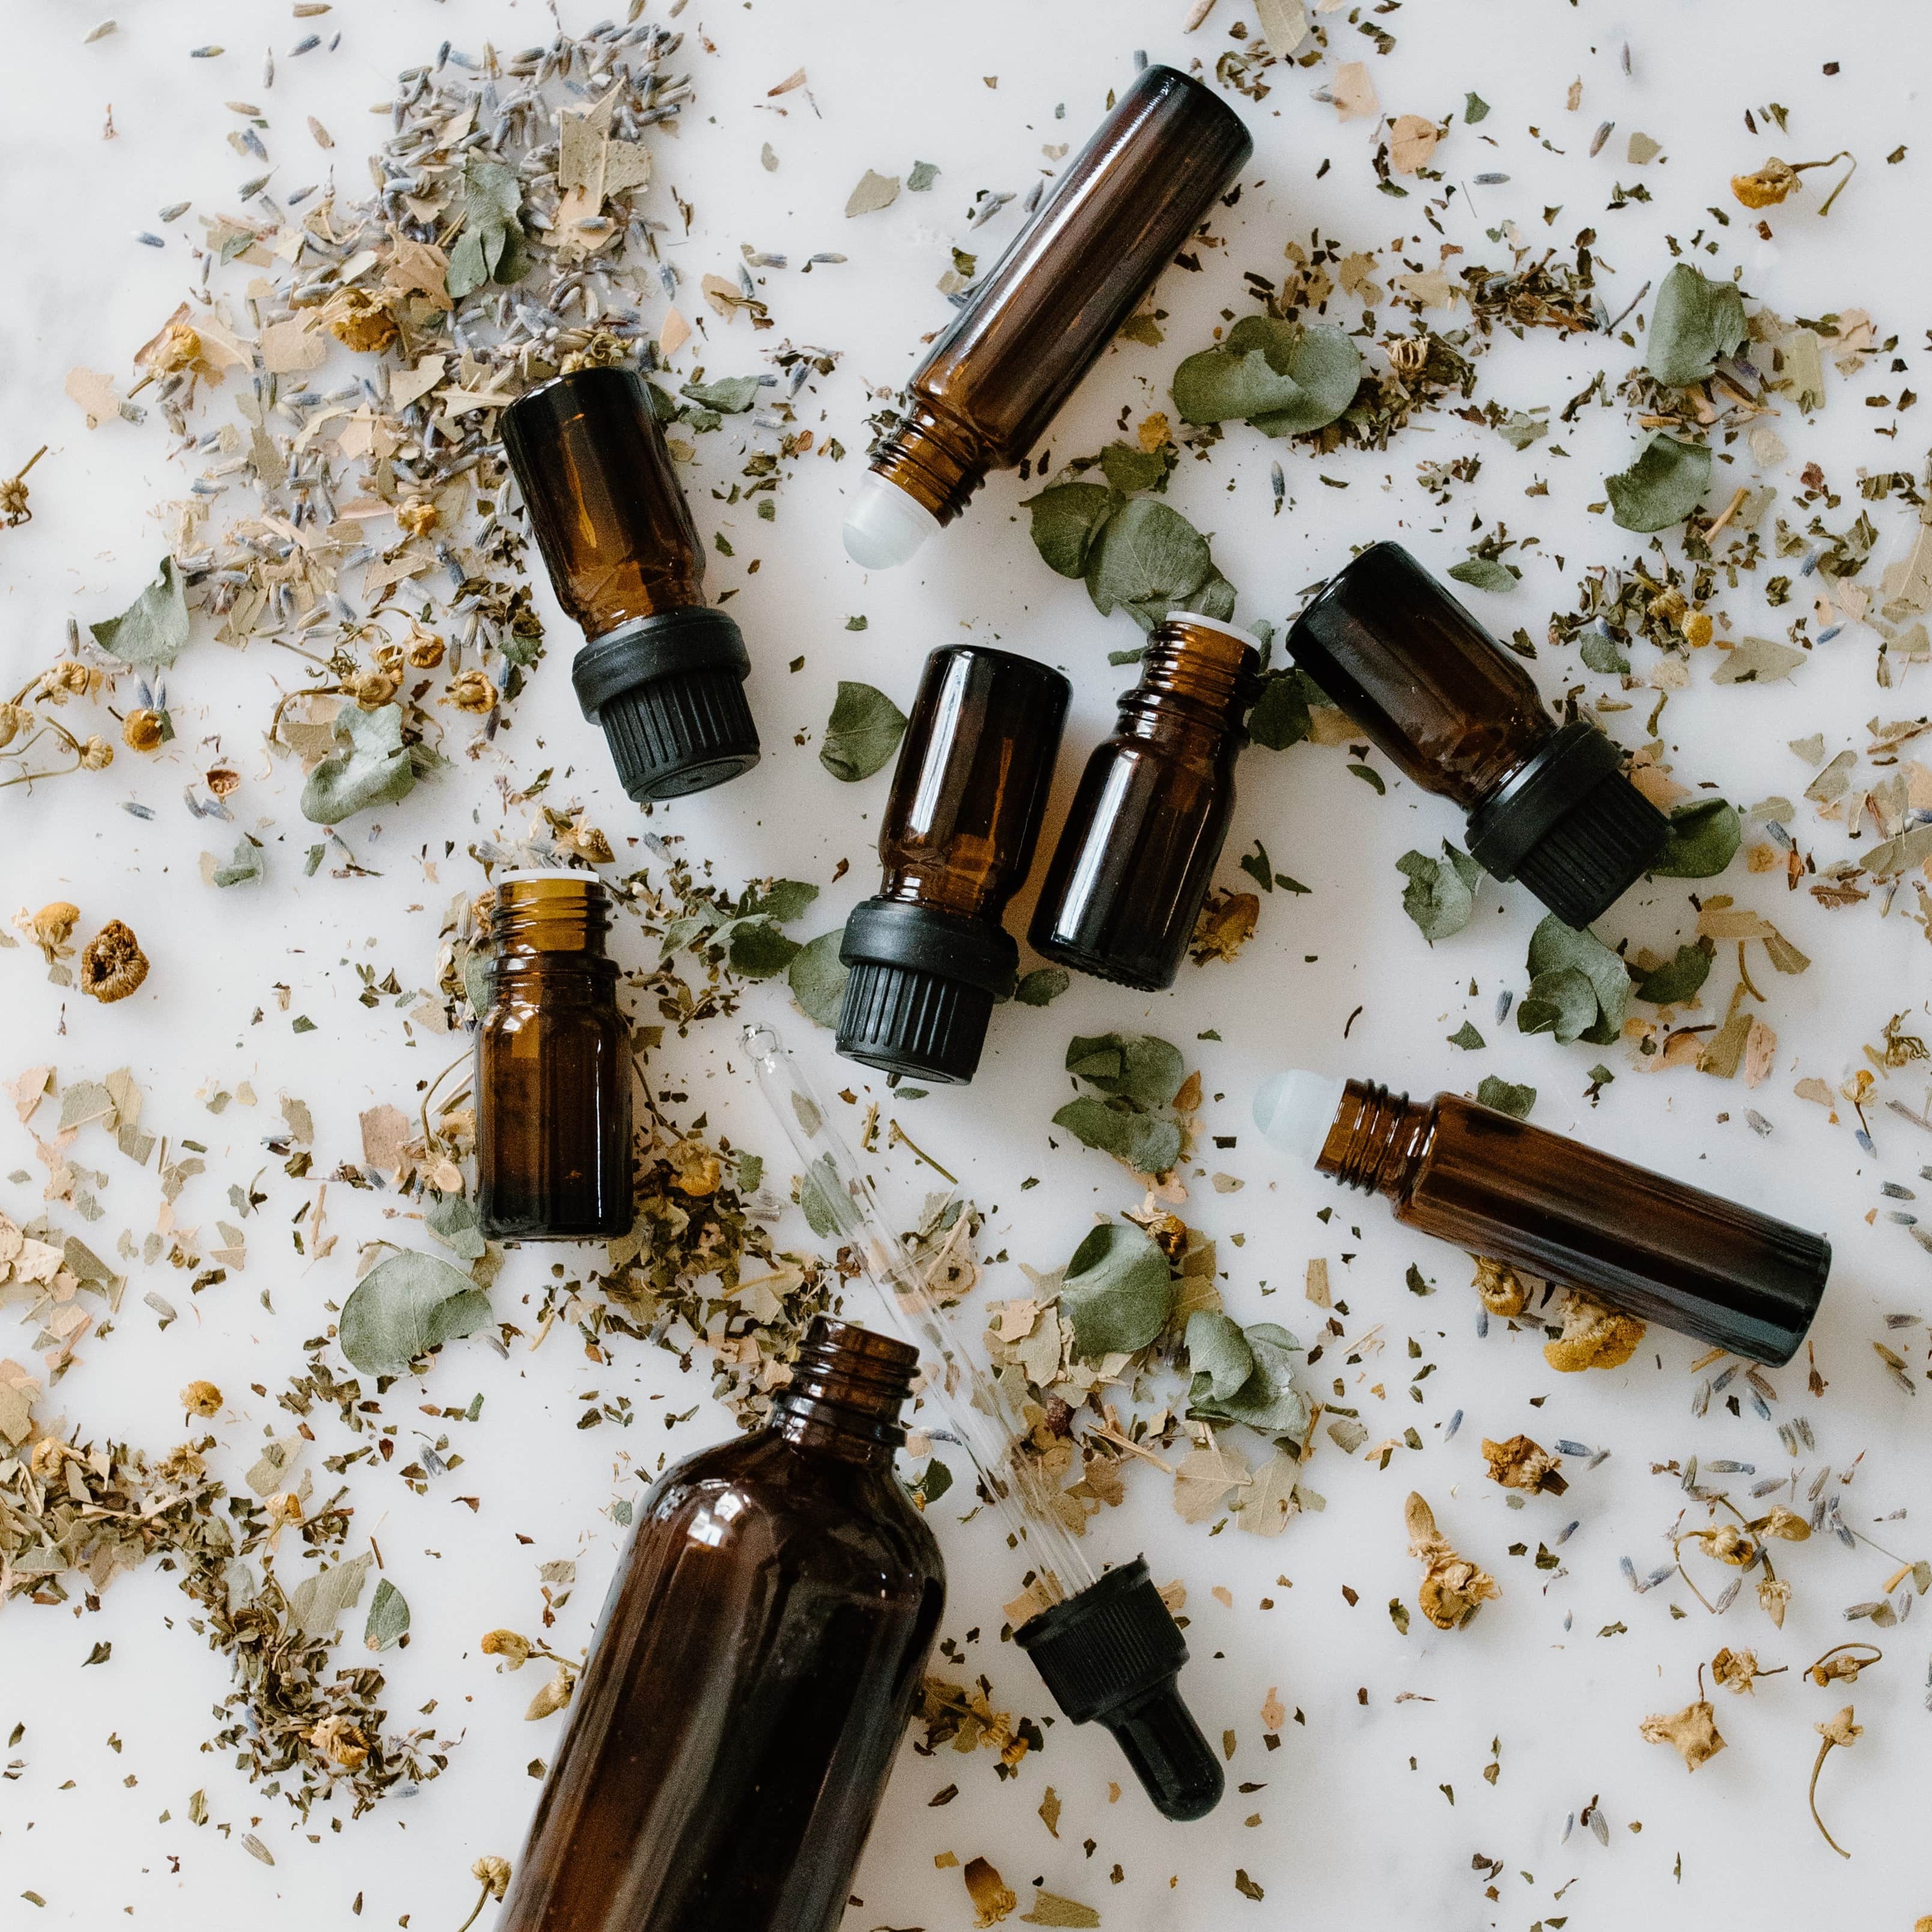 Assortment of essential oils with herbs.